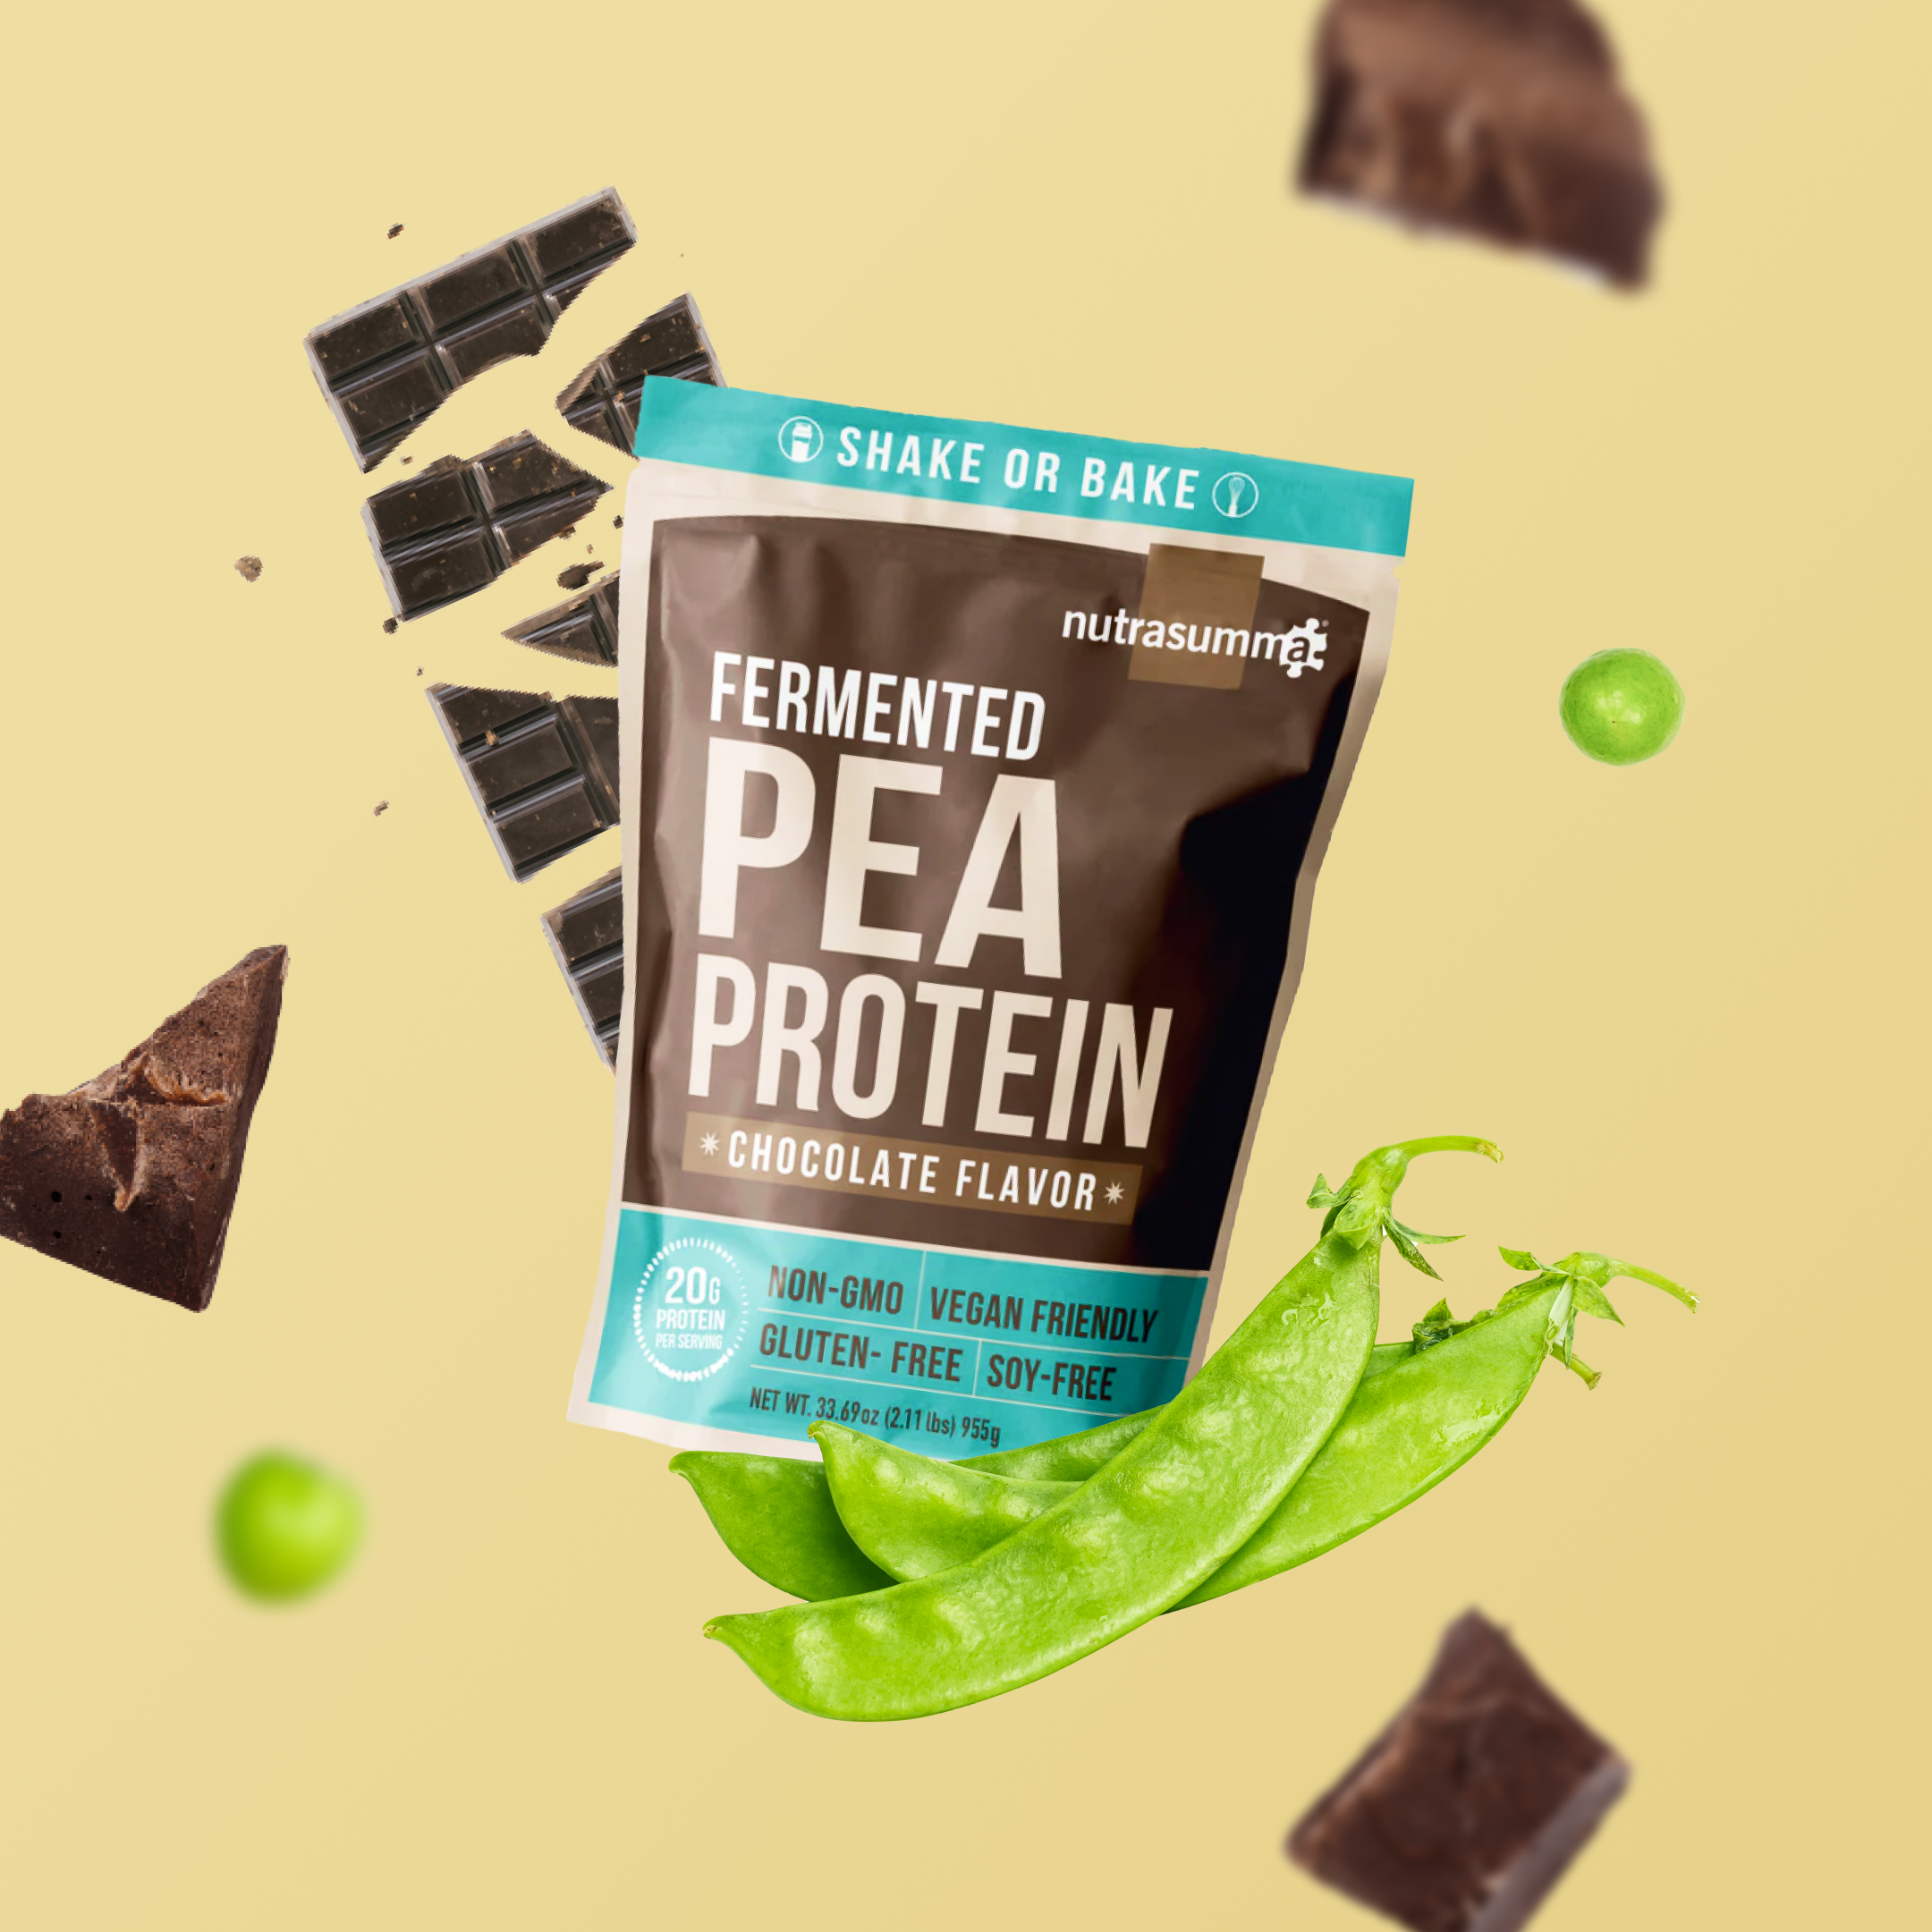 Fermented Pea Protein 2.11 lb  - Chocolate Flavor